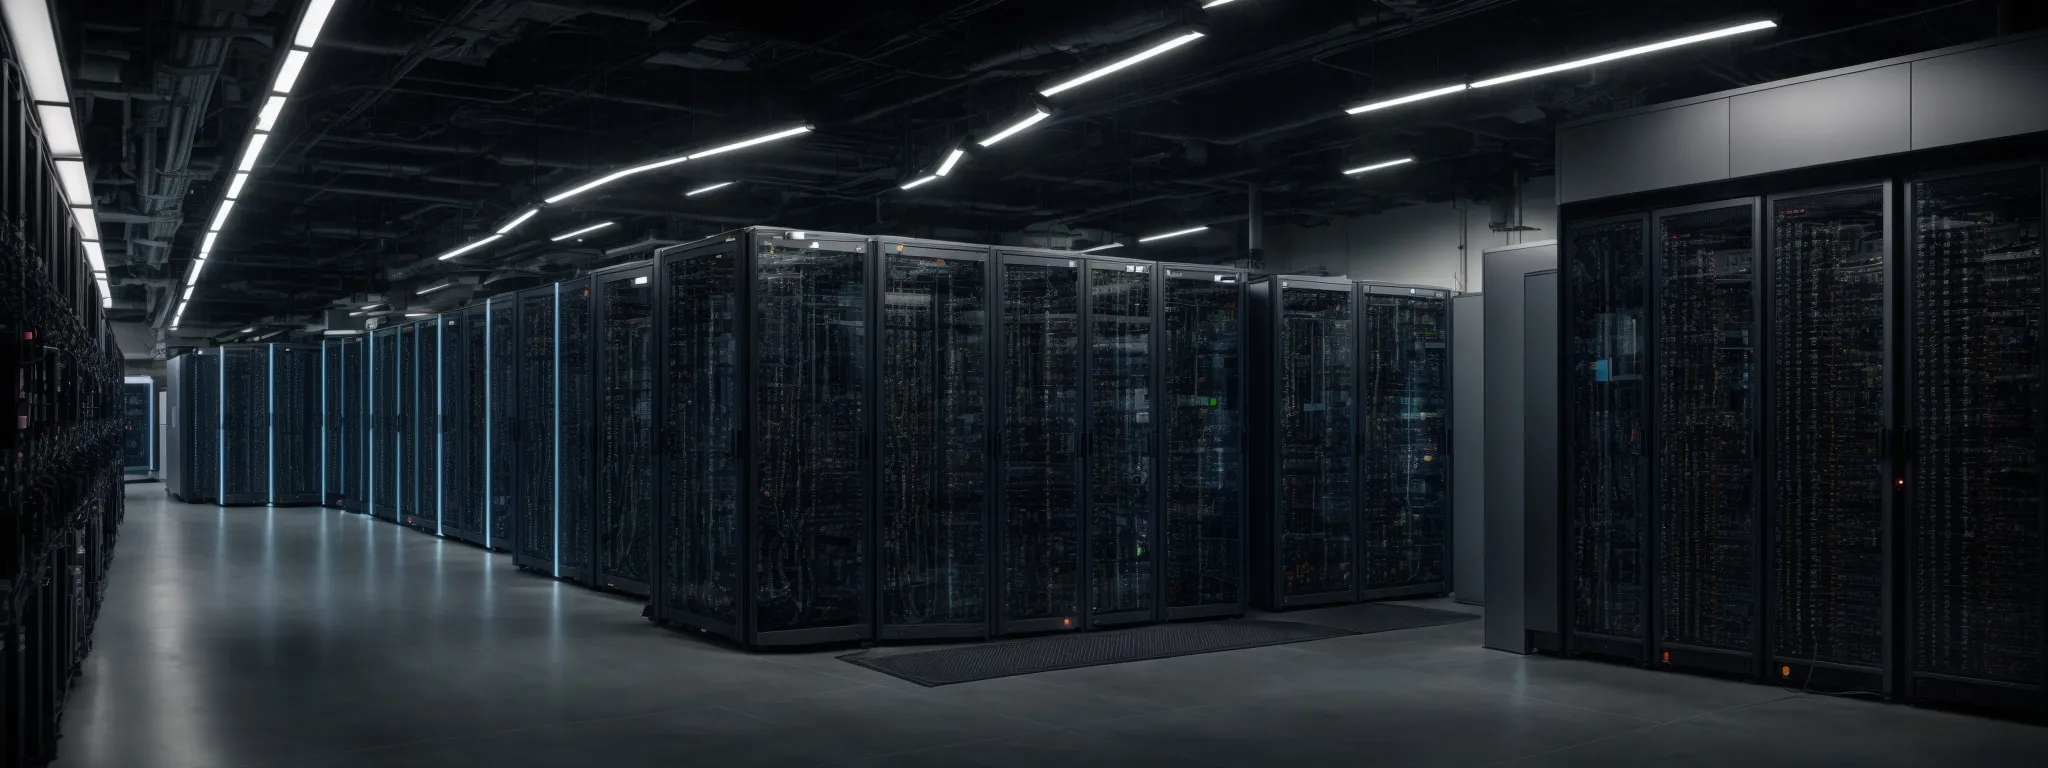 an expansive server room representing the digital infrastructure behind search engine operations.